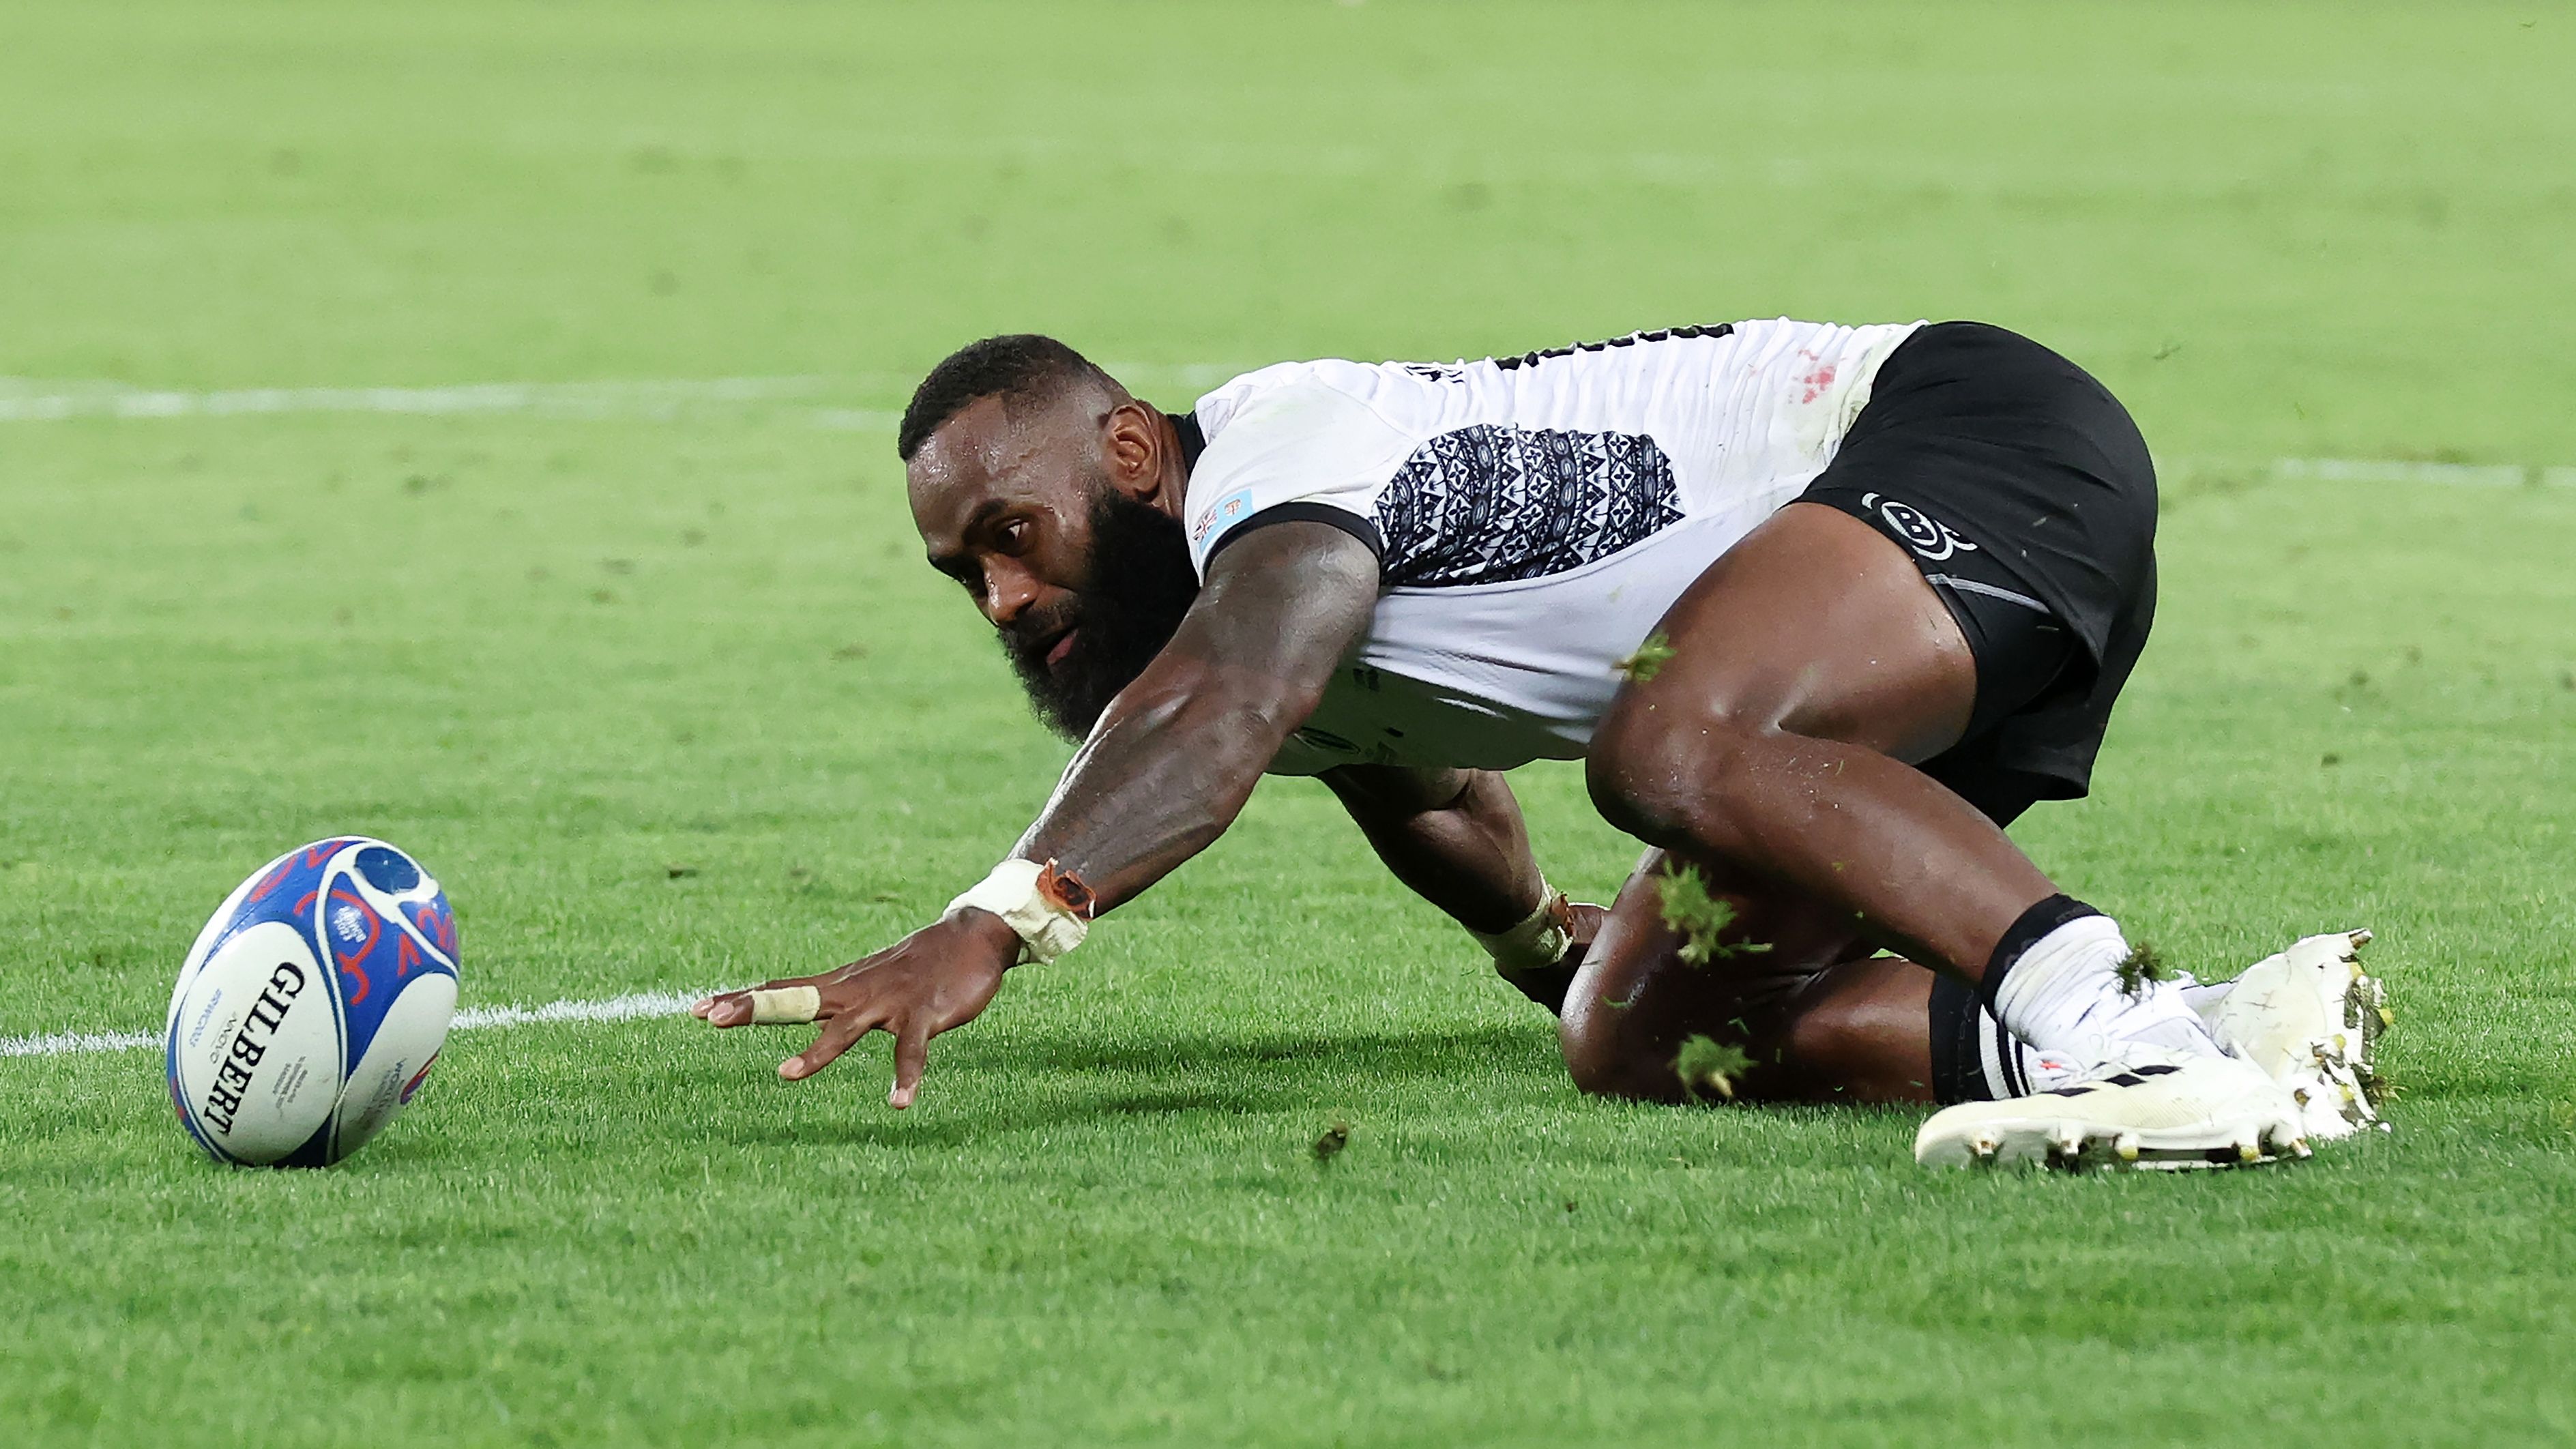 Semi Radradra drops the ball in the final seconds during the Rugby World Cup match between Wales and Fiji at Nouveau Stade de Bordeaux.